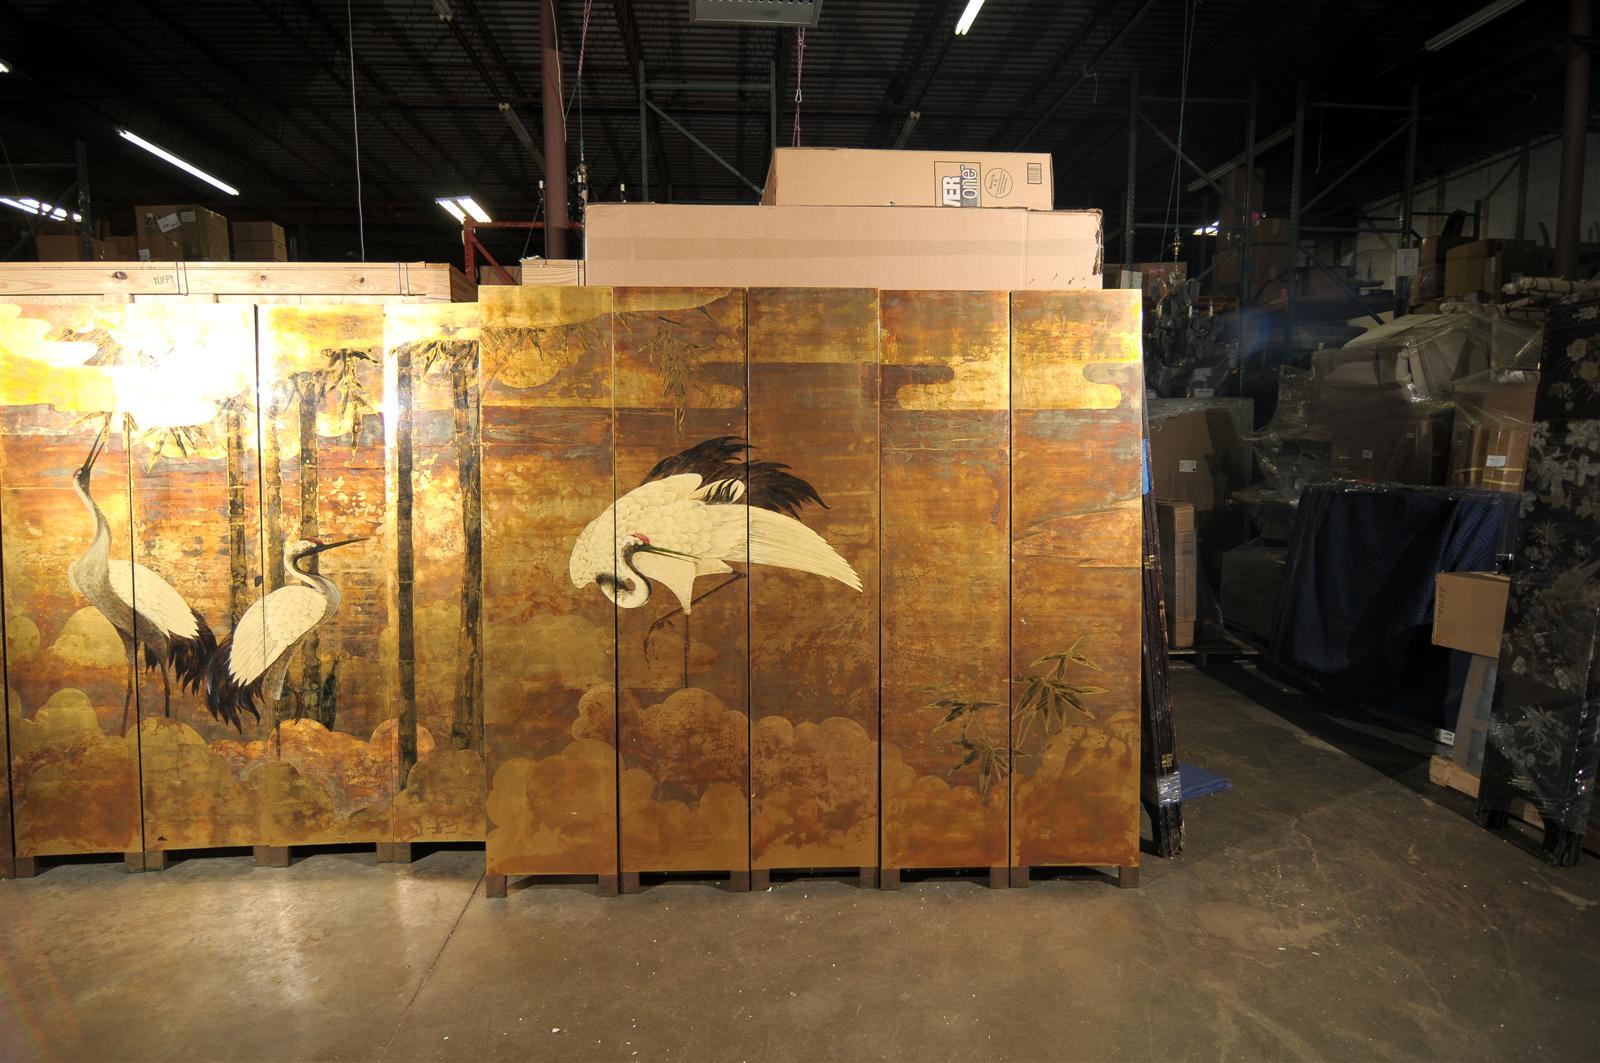 Dramatic 20th century oriental 10-panel lacquered screen with cranes and bamboo at daybreak, gold tones
Each panel: 18